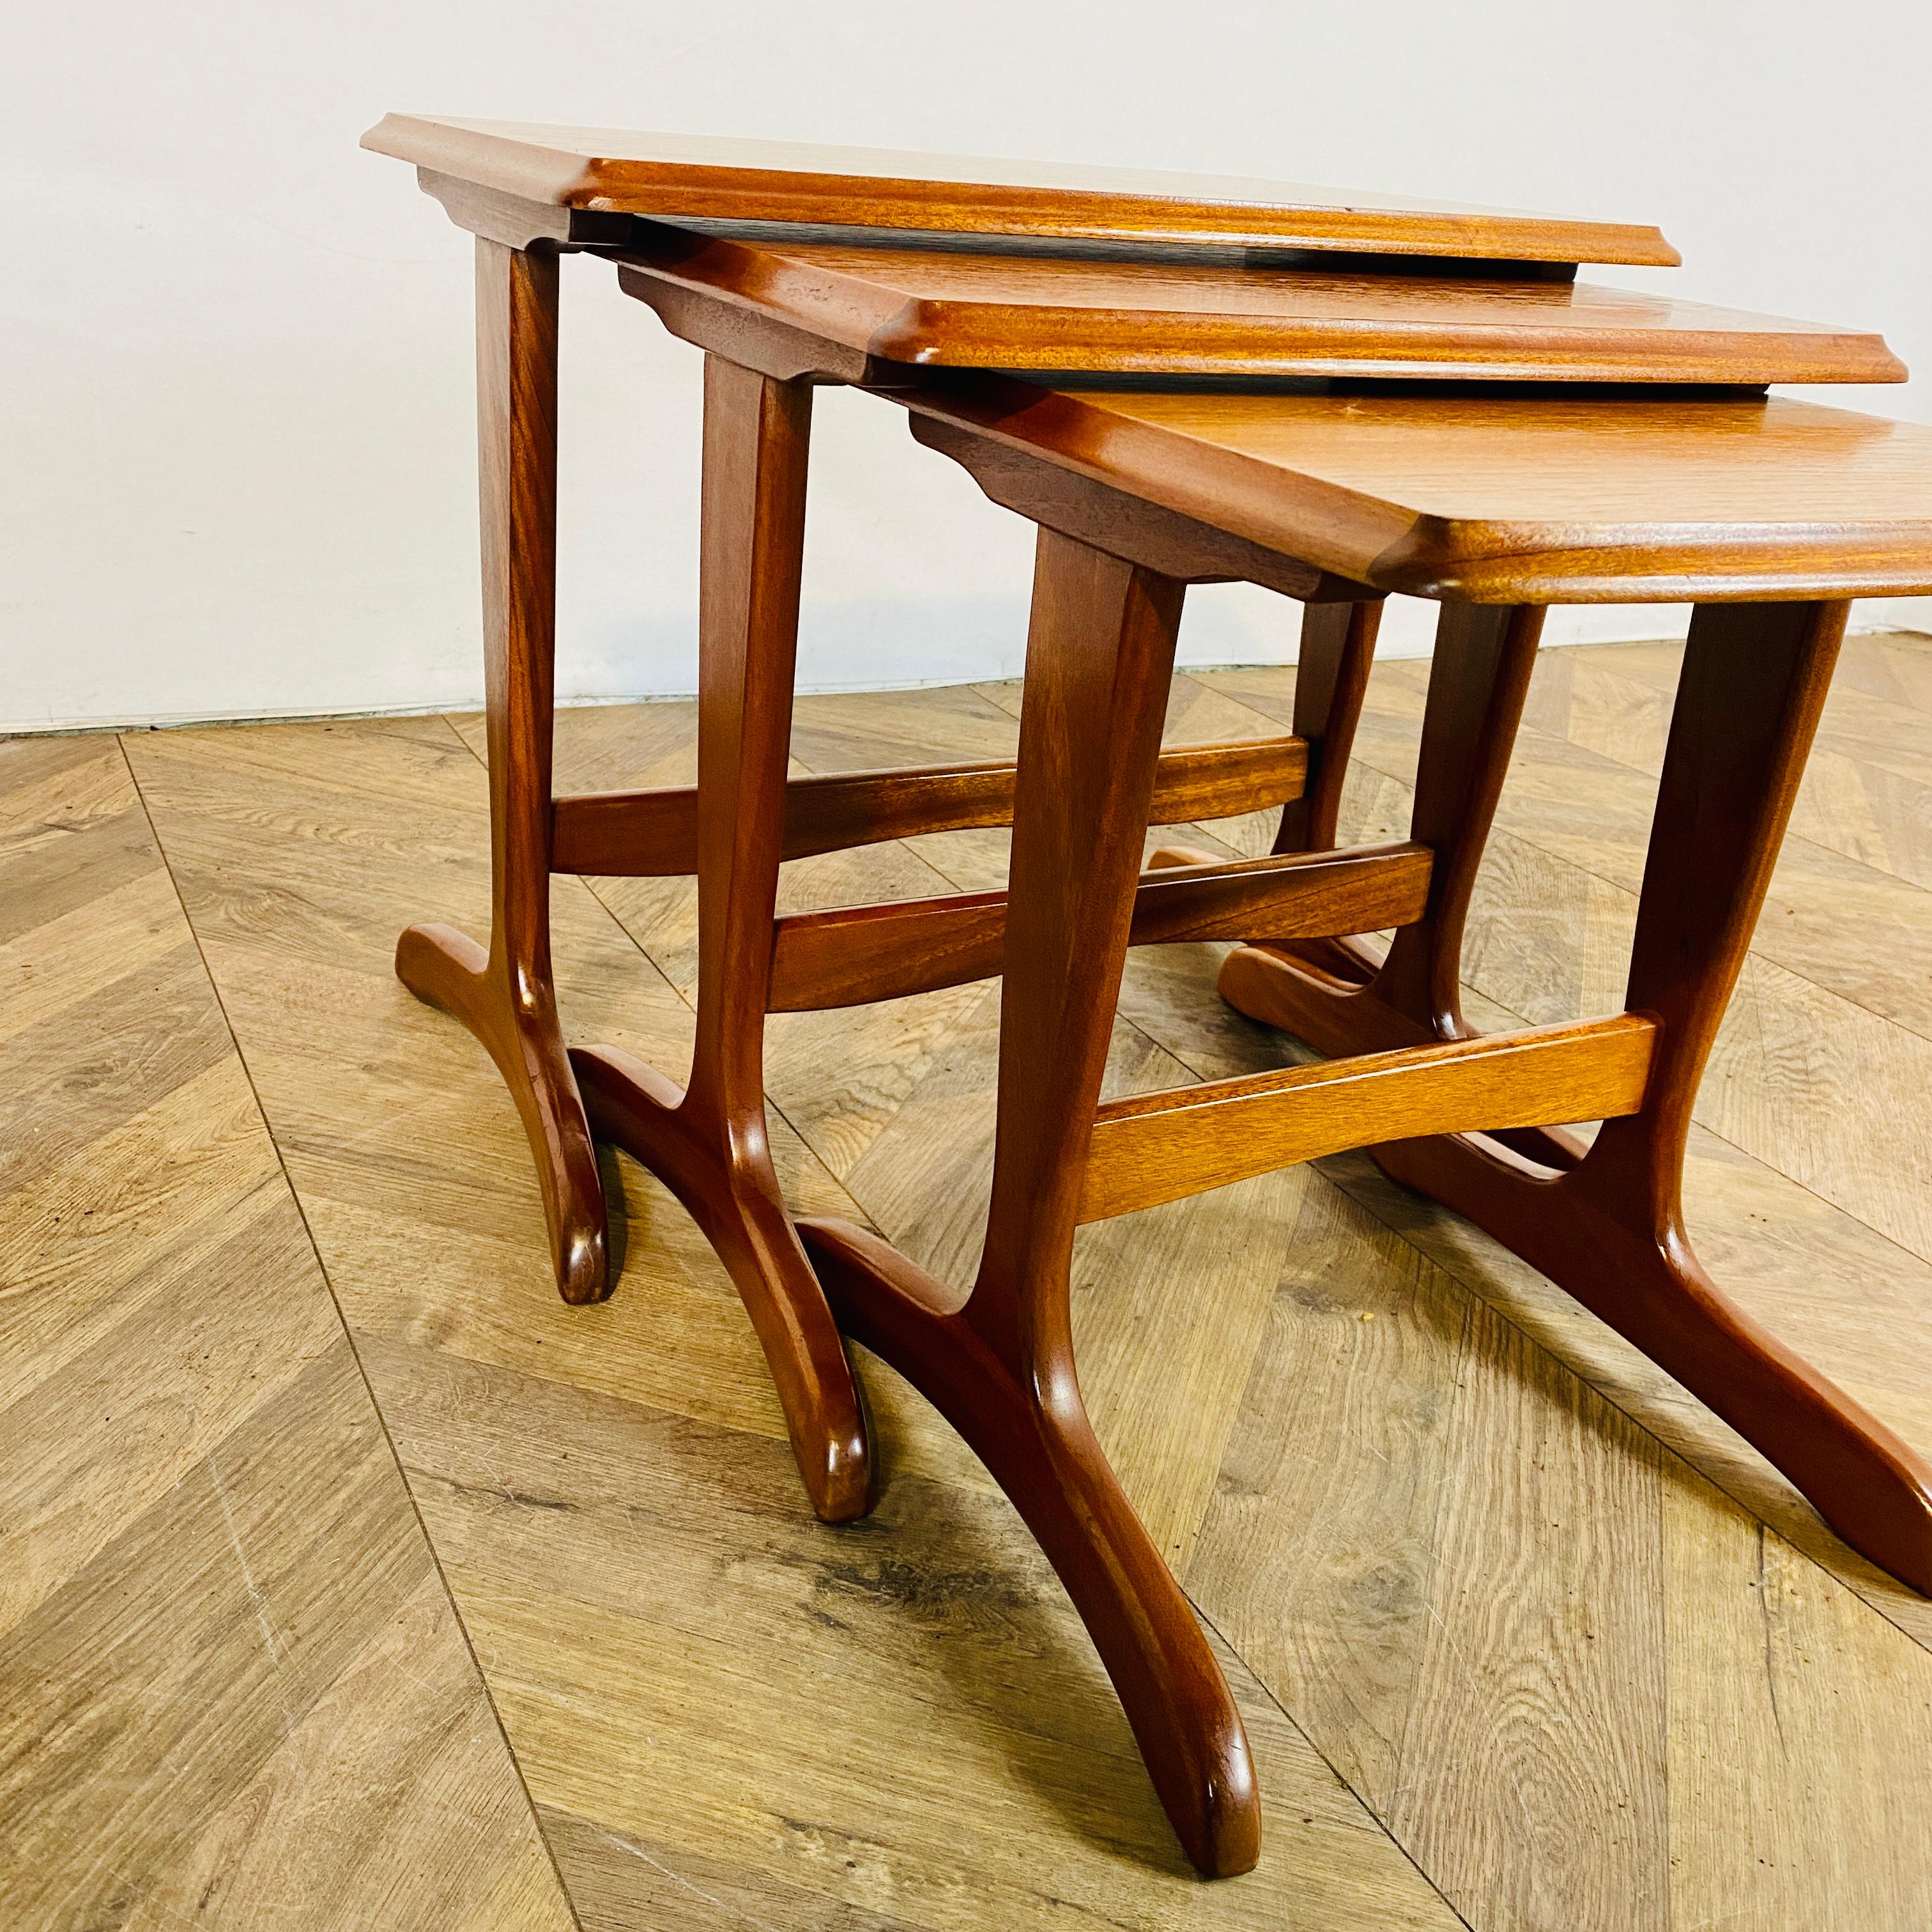 A lovely set of 3 midcentury teak nest of tables, circa 1970s.

The teak frames are in great vintage condition, with only minor wear and scuffs, in-keeping with its age and usage. (as pictured).